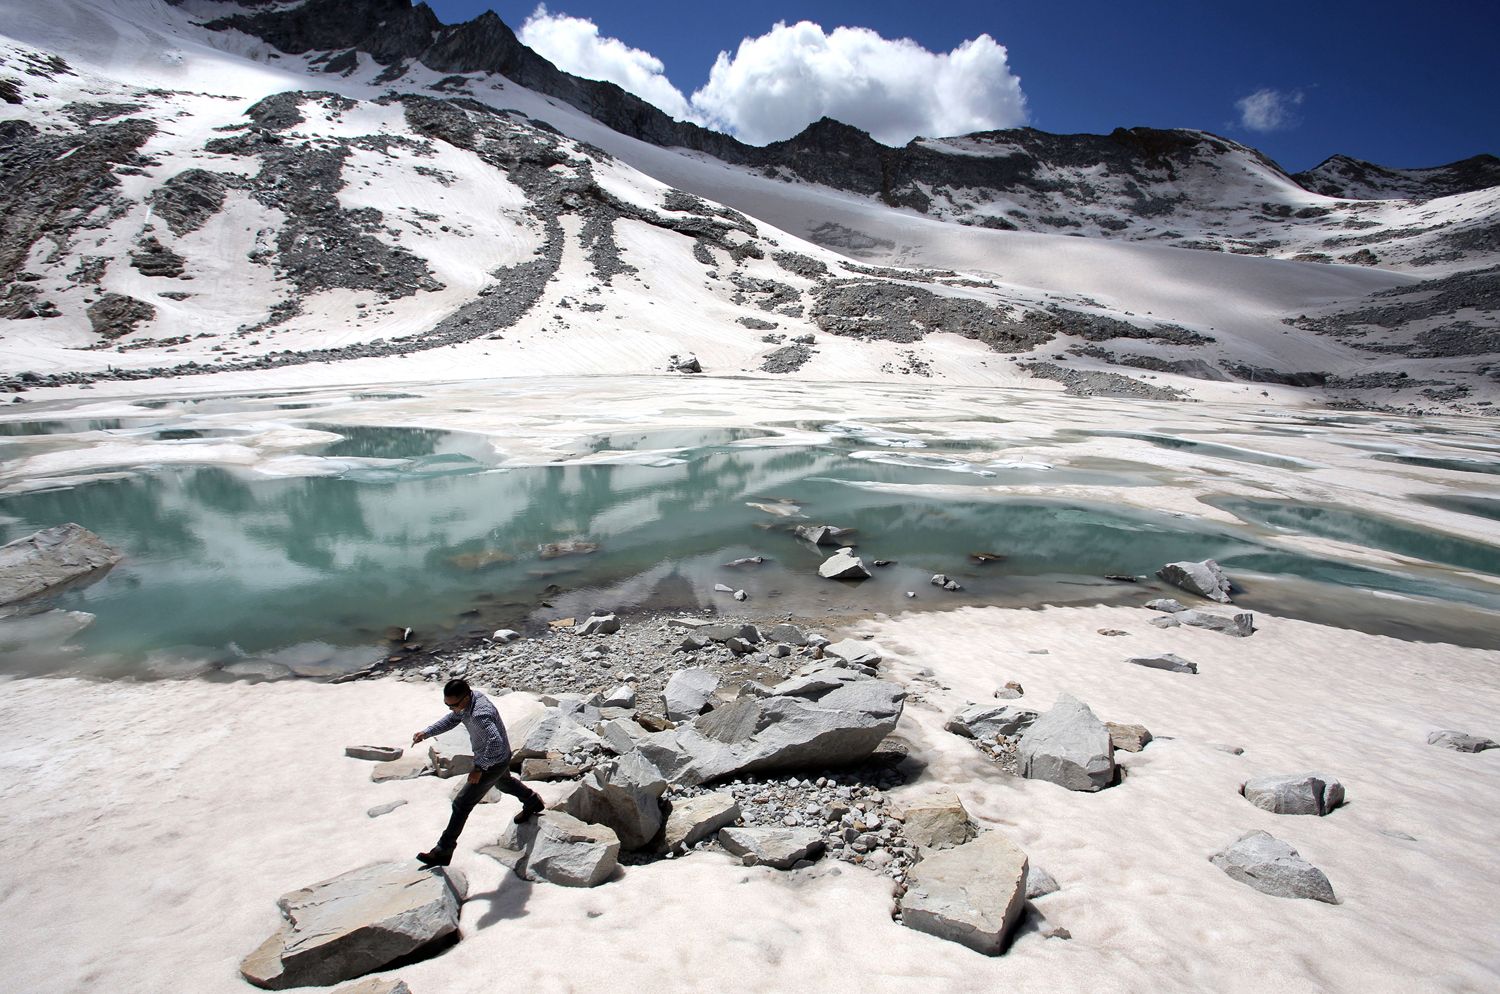 A man walks over rocks near to a glacial lake that has formed at the base of the Dagu Glacier on the southeast edge of the Tibetan Plateau. The glacier has been reducing in size in recent years as a result of rising temperatures in the region. Image by Sean Gallagher. China, 2012.